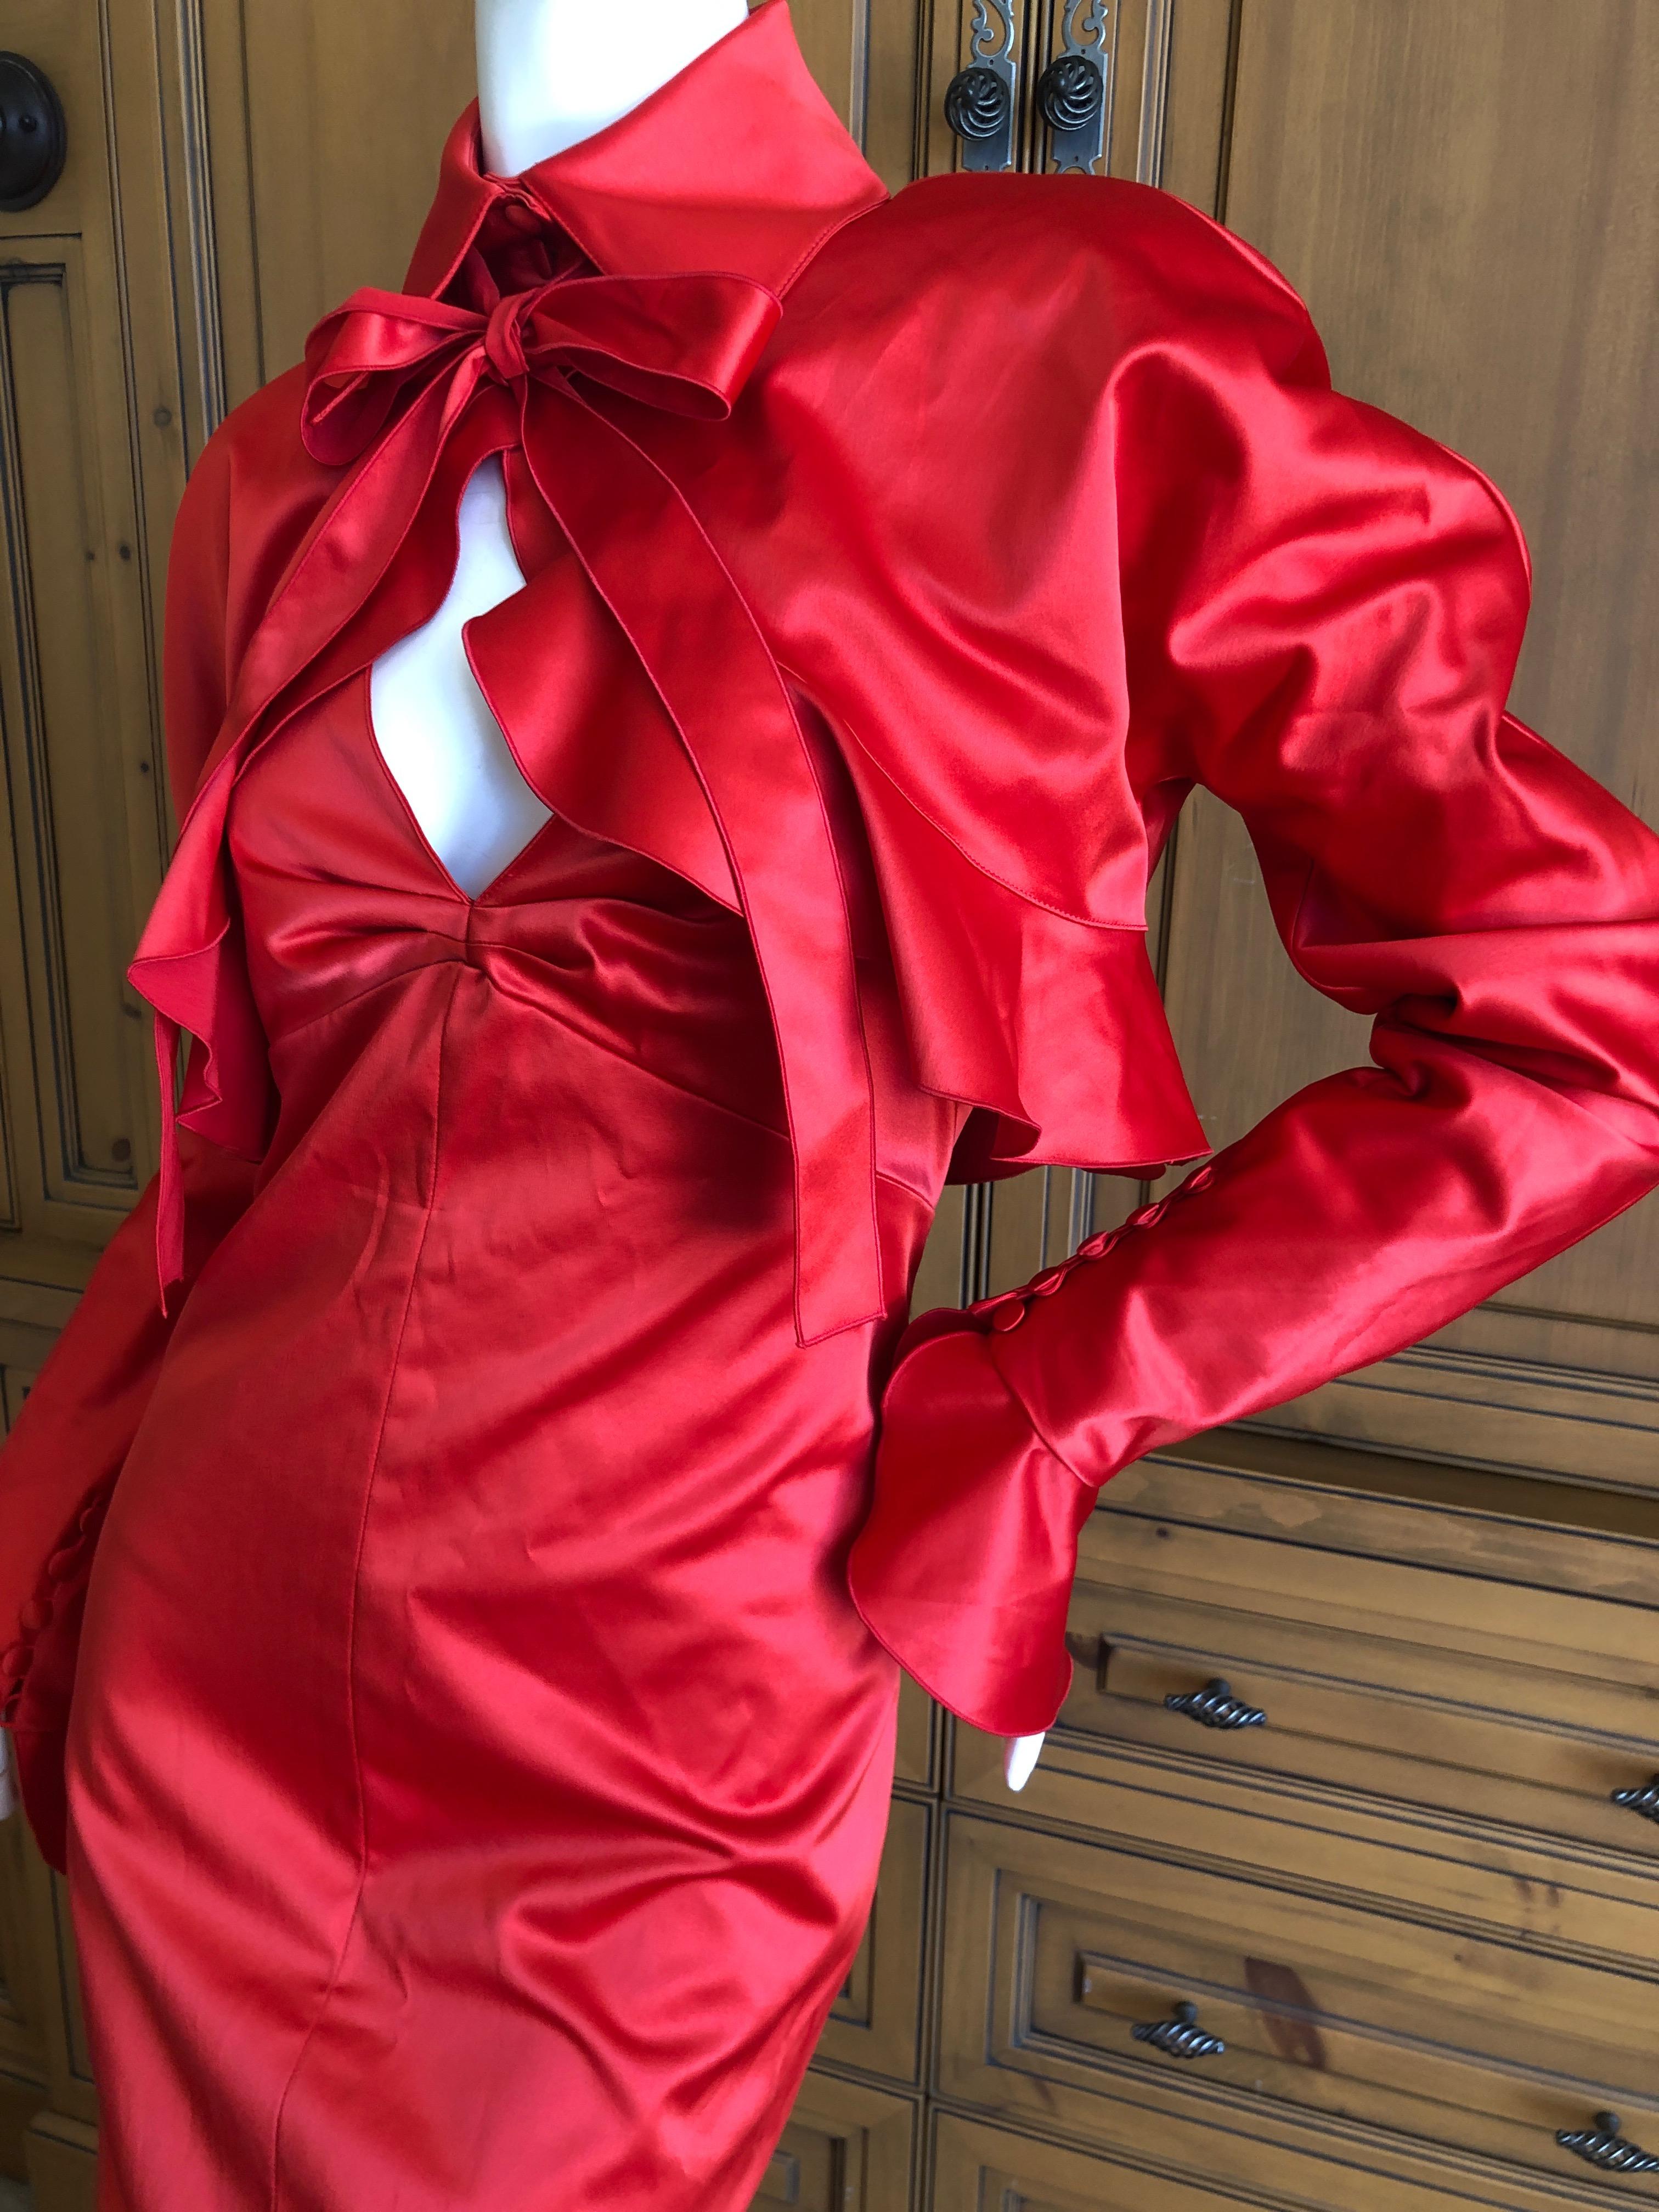 Karl Lagerfeld 1980's Red Evening Dress with Matching Jacket Lagerfeld Gallery 3